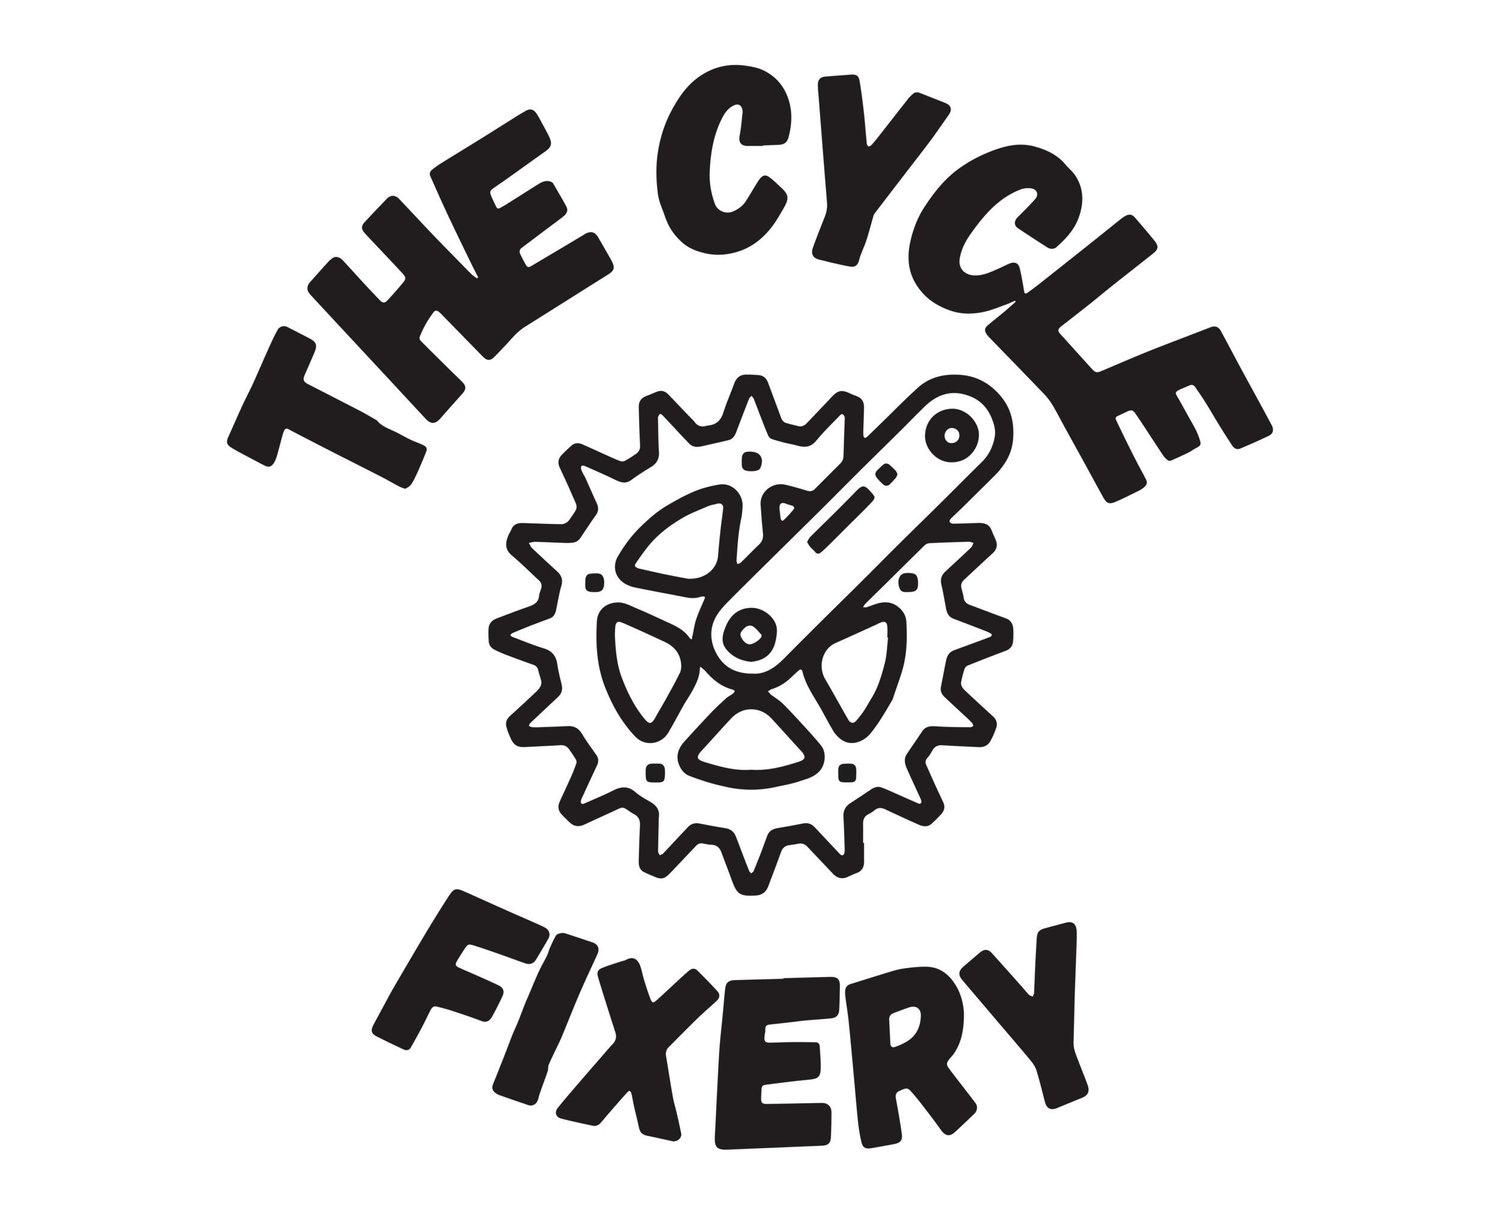 The Cycle Fixery